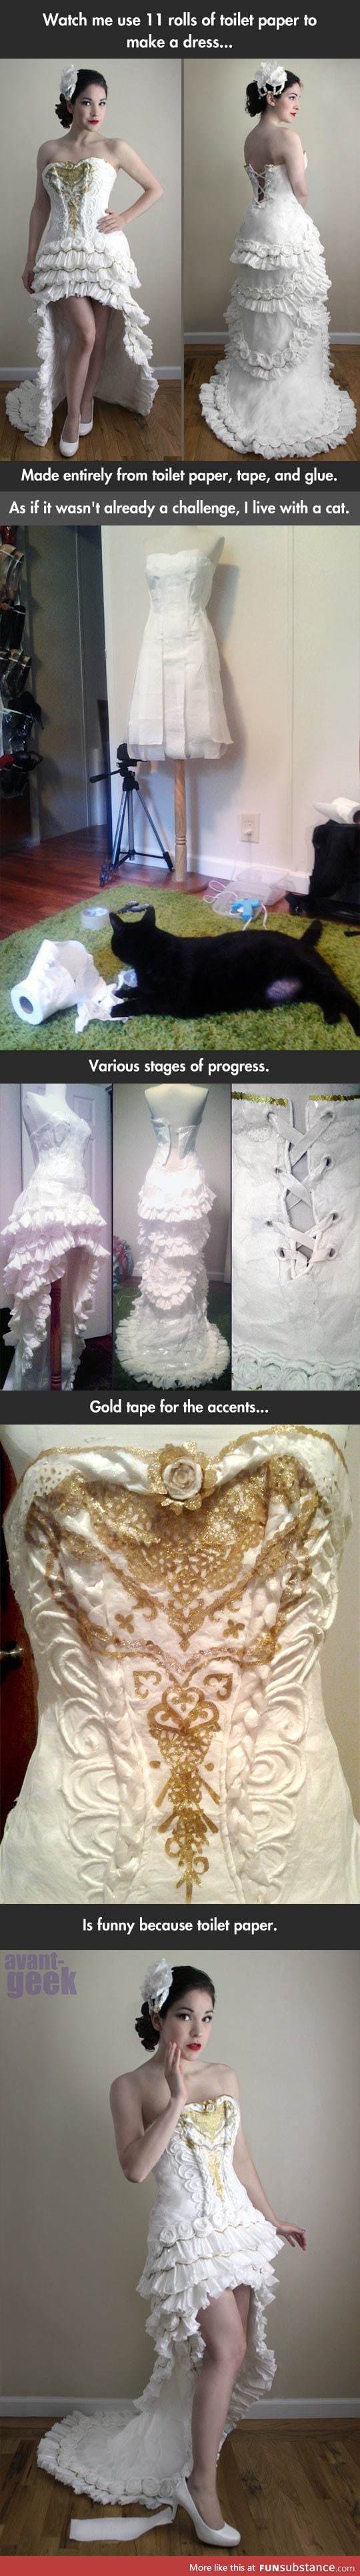 Dress made out of toilet paper